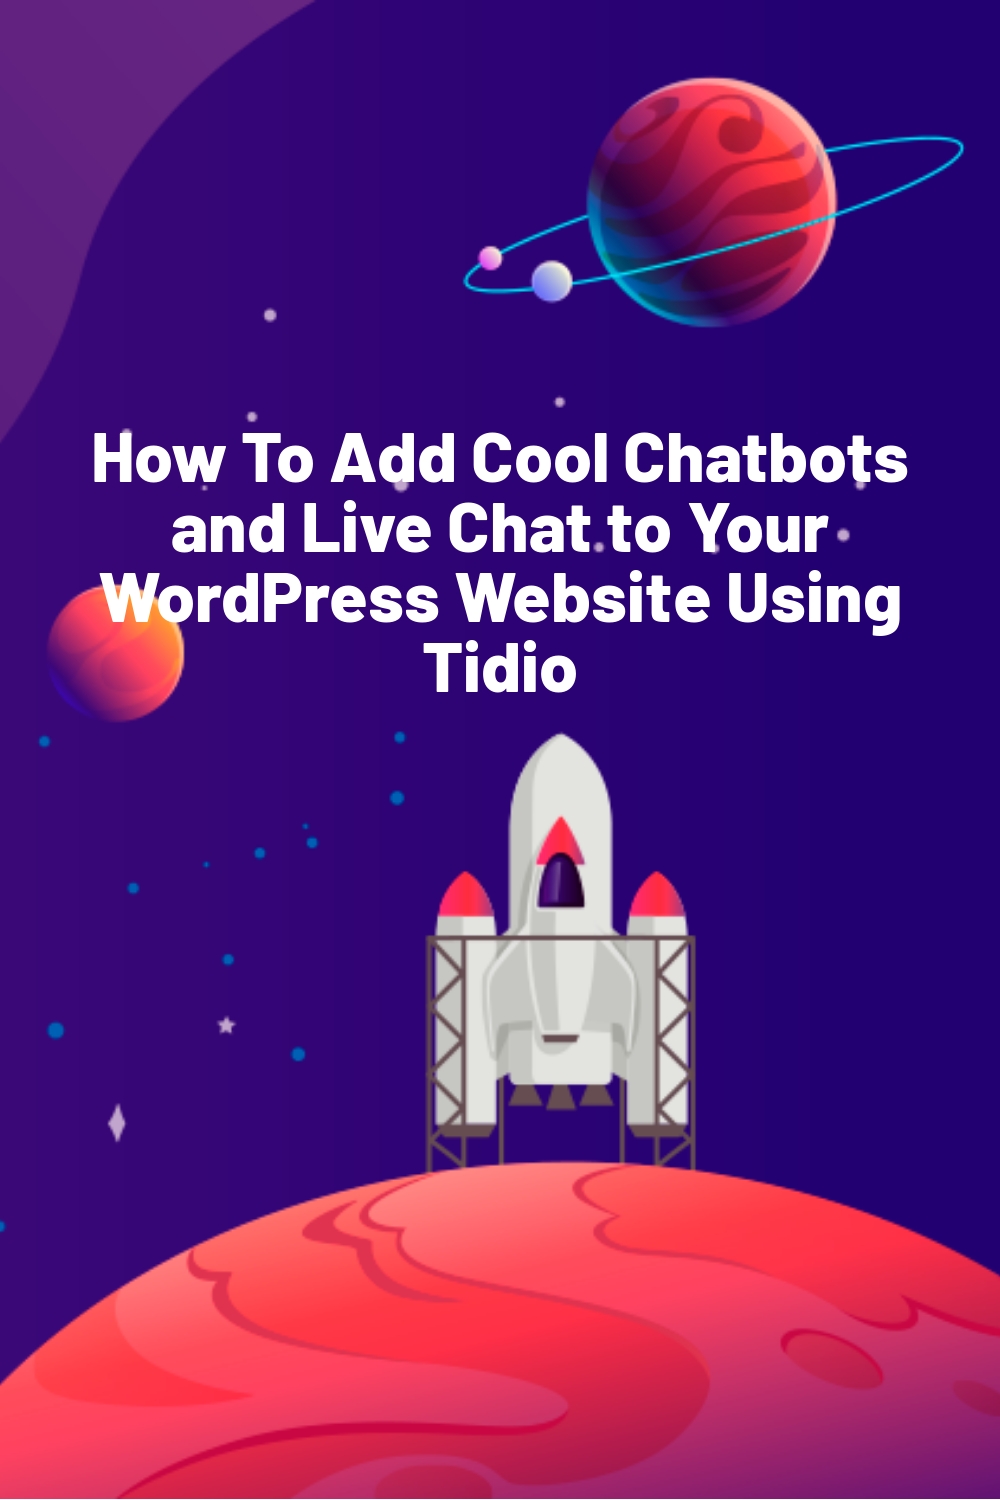 How To Add Cool Chatbots and Live Chat to Your WordPress Website Using Tidio